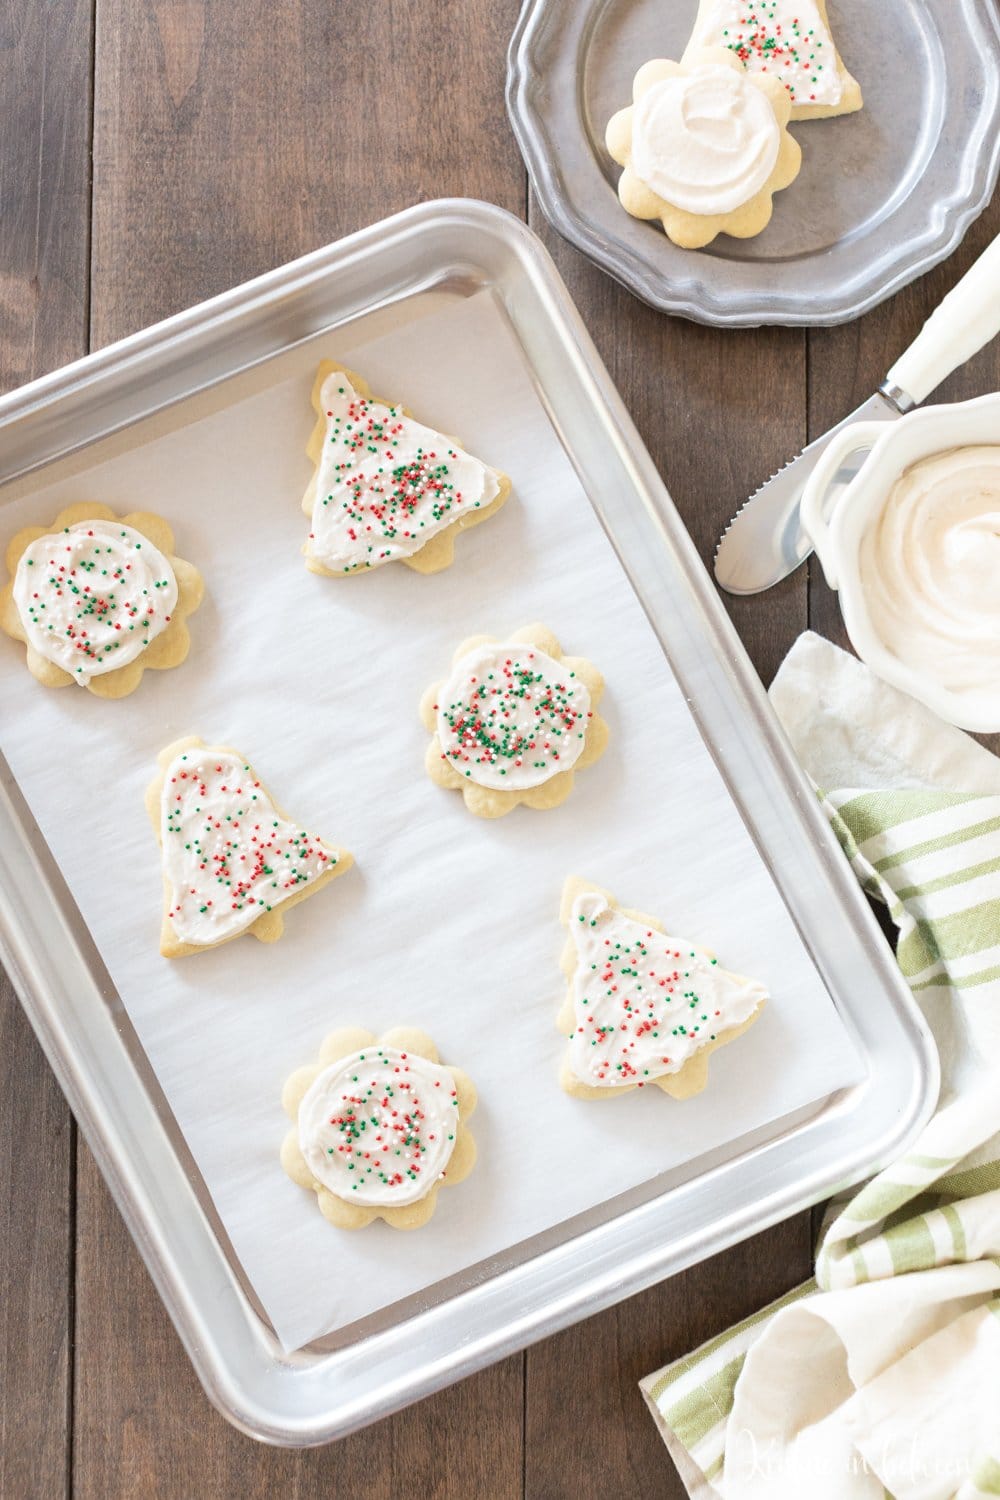 This is the best traditional sugar cookie recipe around! The cookies are light and flaky, perfect for topping with homemade buttercream frosting and sprinkles!